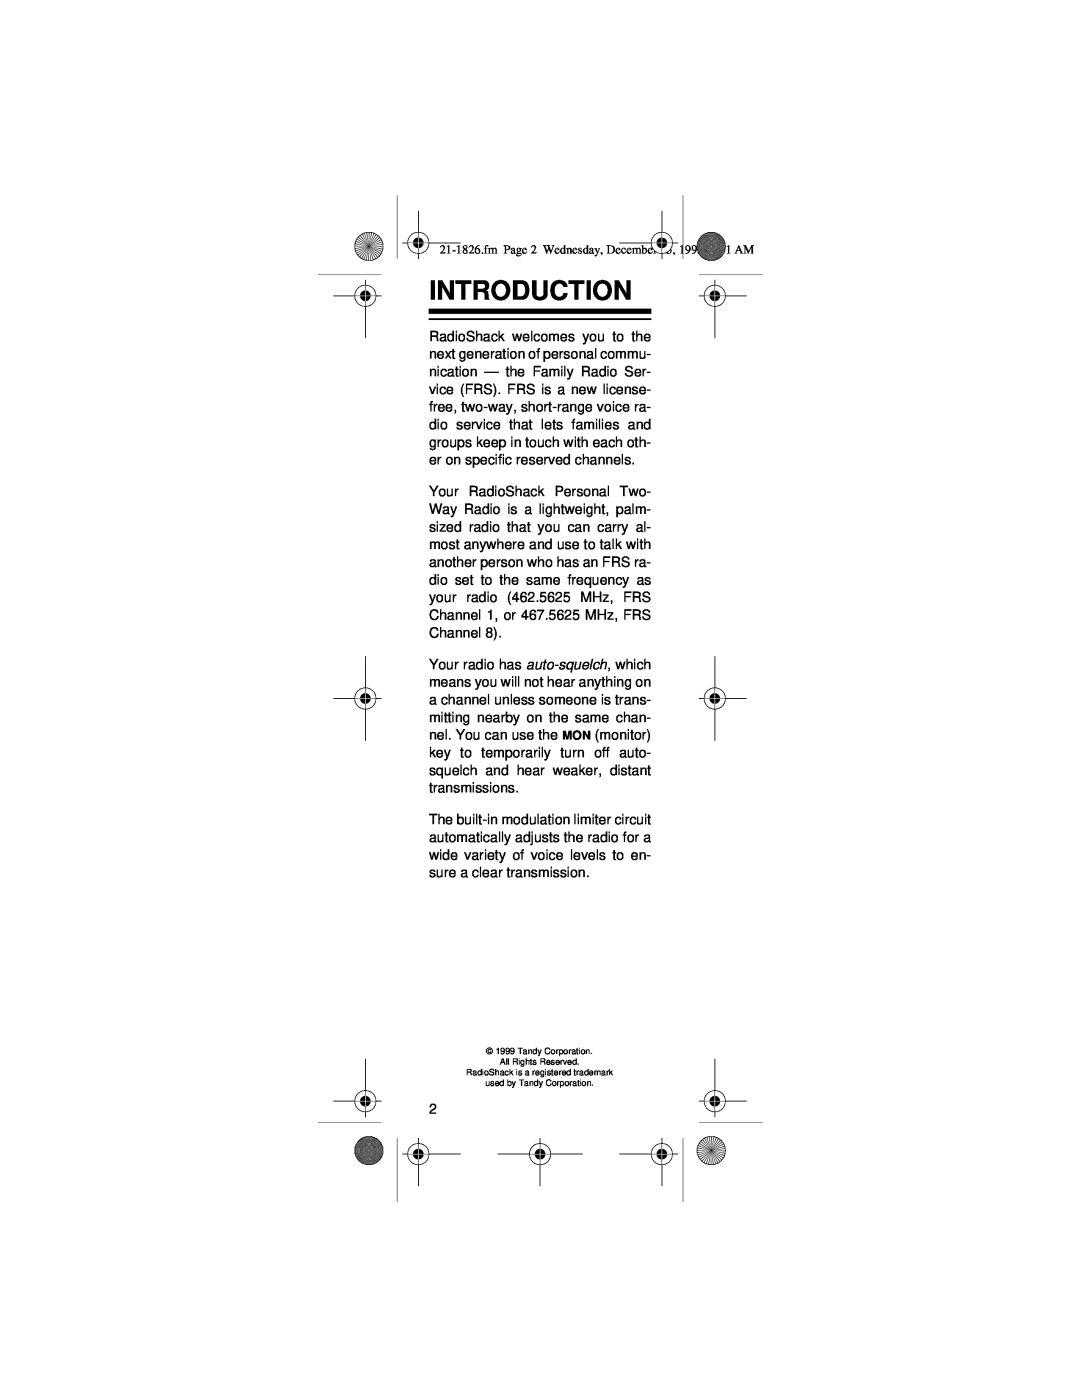 Rosewill 21-1828, 21-1829, 21-1826 owner manual Introduction, Tandy Corporation All Rights Reserved 